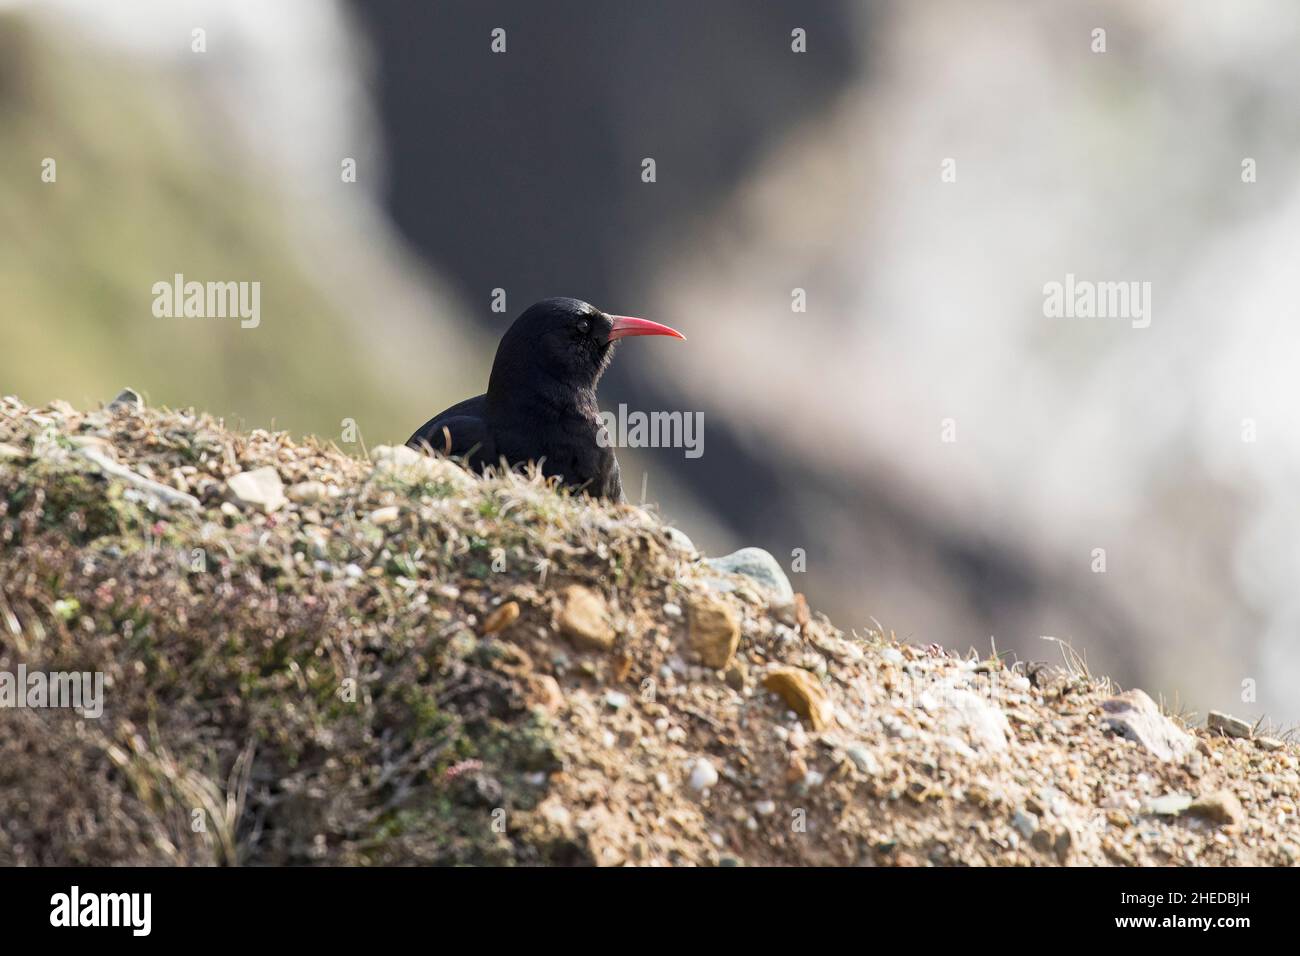 Red-billed chough Pyrrhocorax pyrrhocorax on sea cliffs South Stack Cliffs RSPB Reserve Holyhead Anglesey Wales UK April 2016 Stock Photo